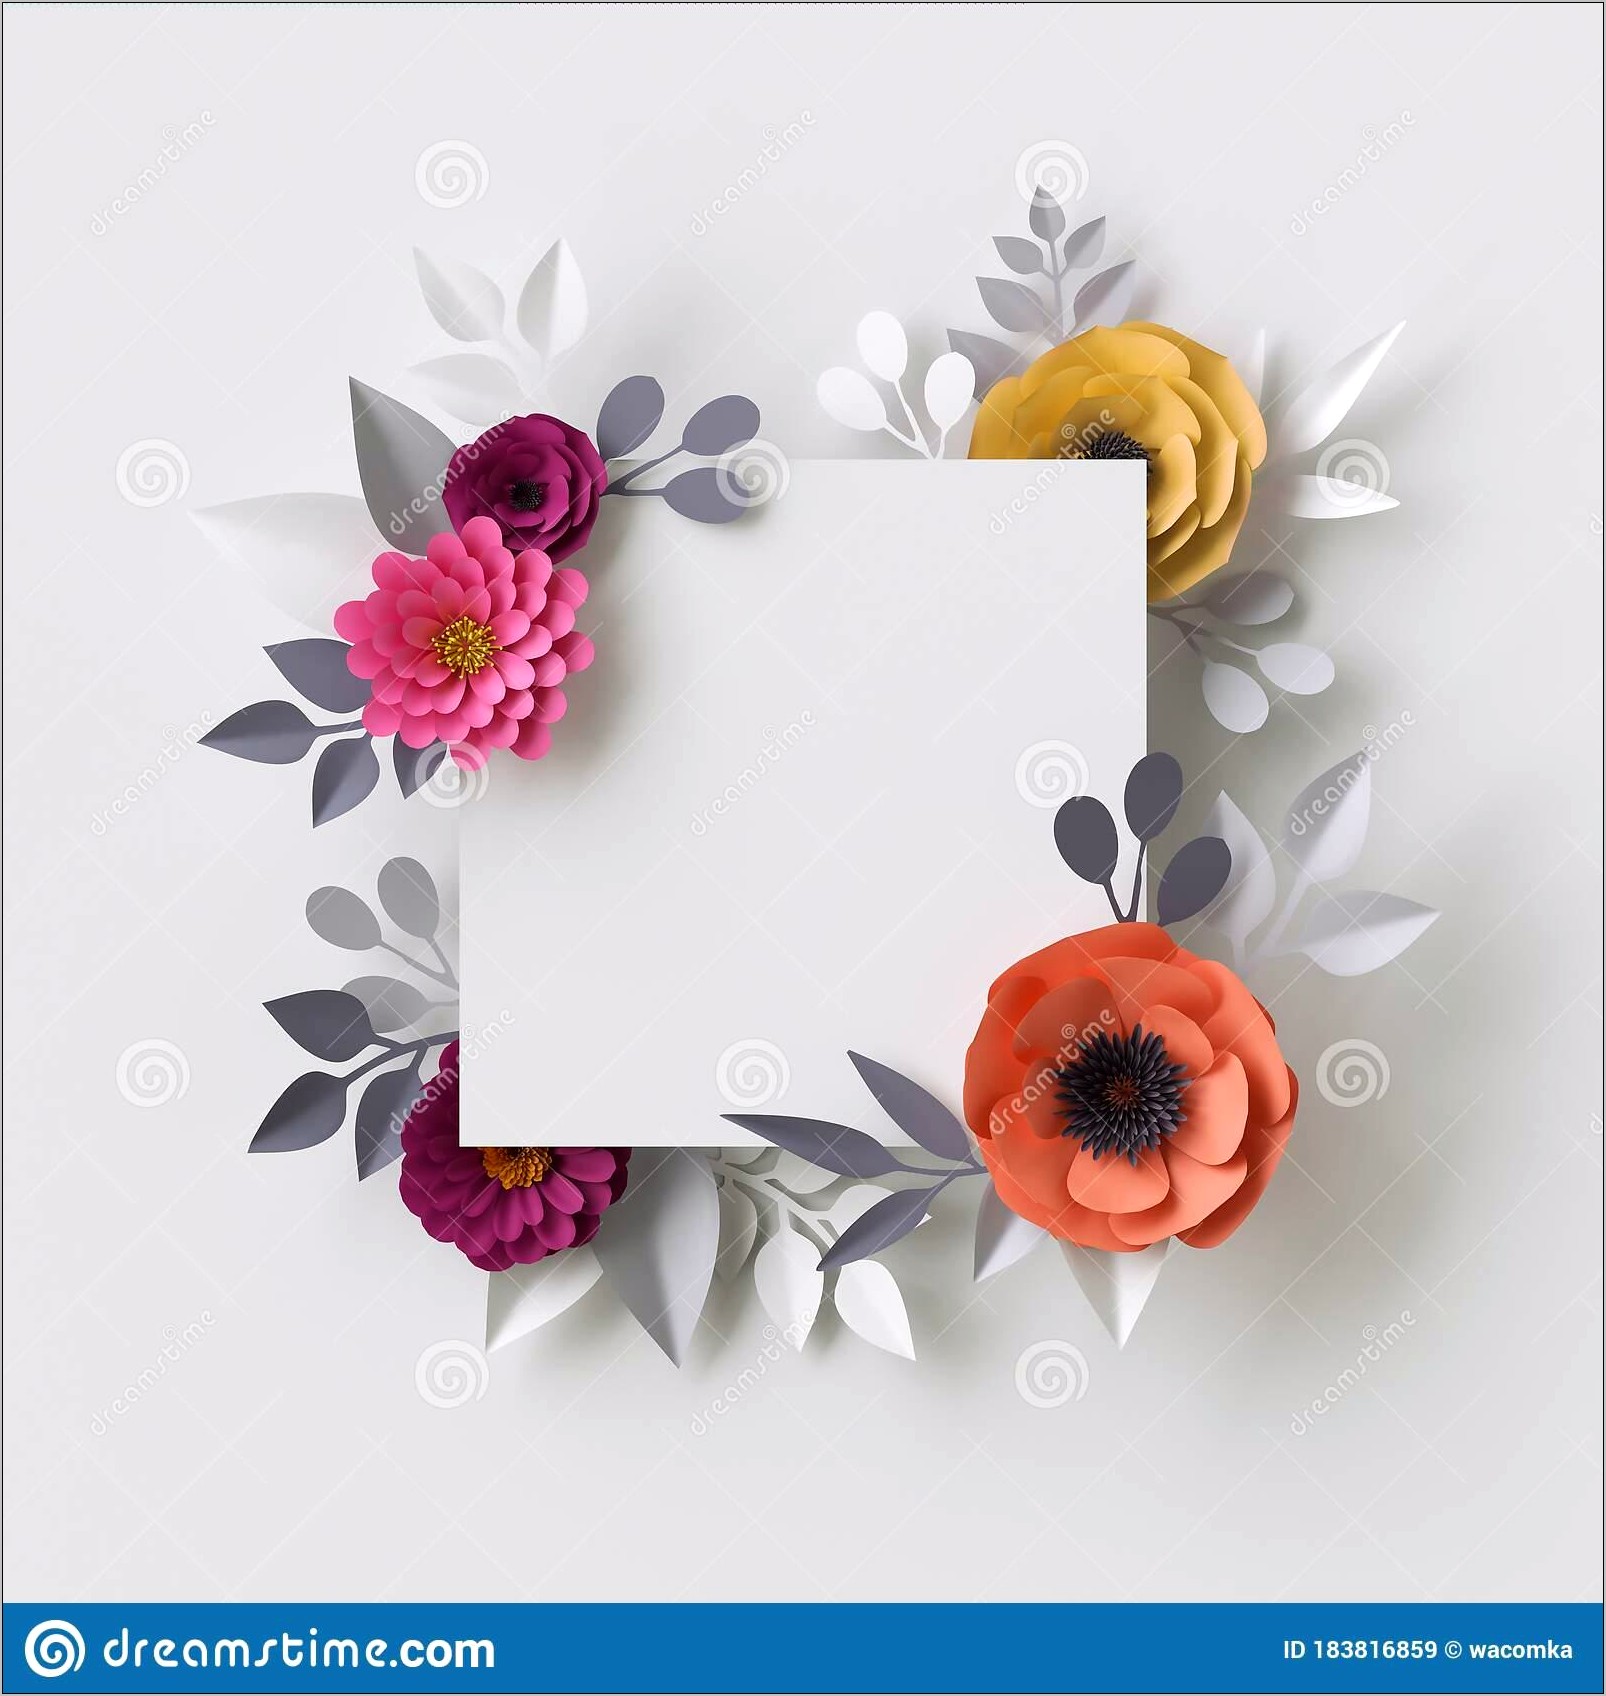 blank-greeting-card-template-free-download-resume-example-gallery